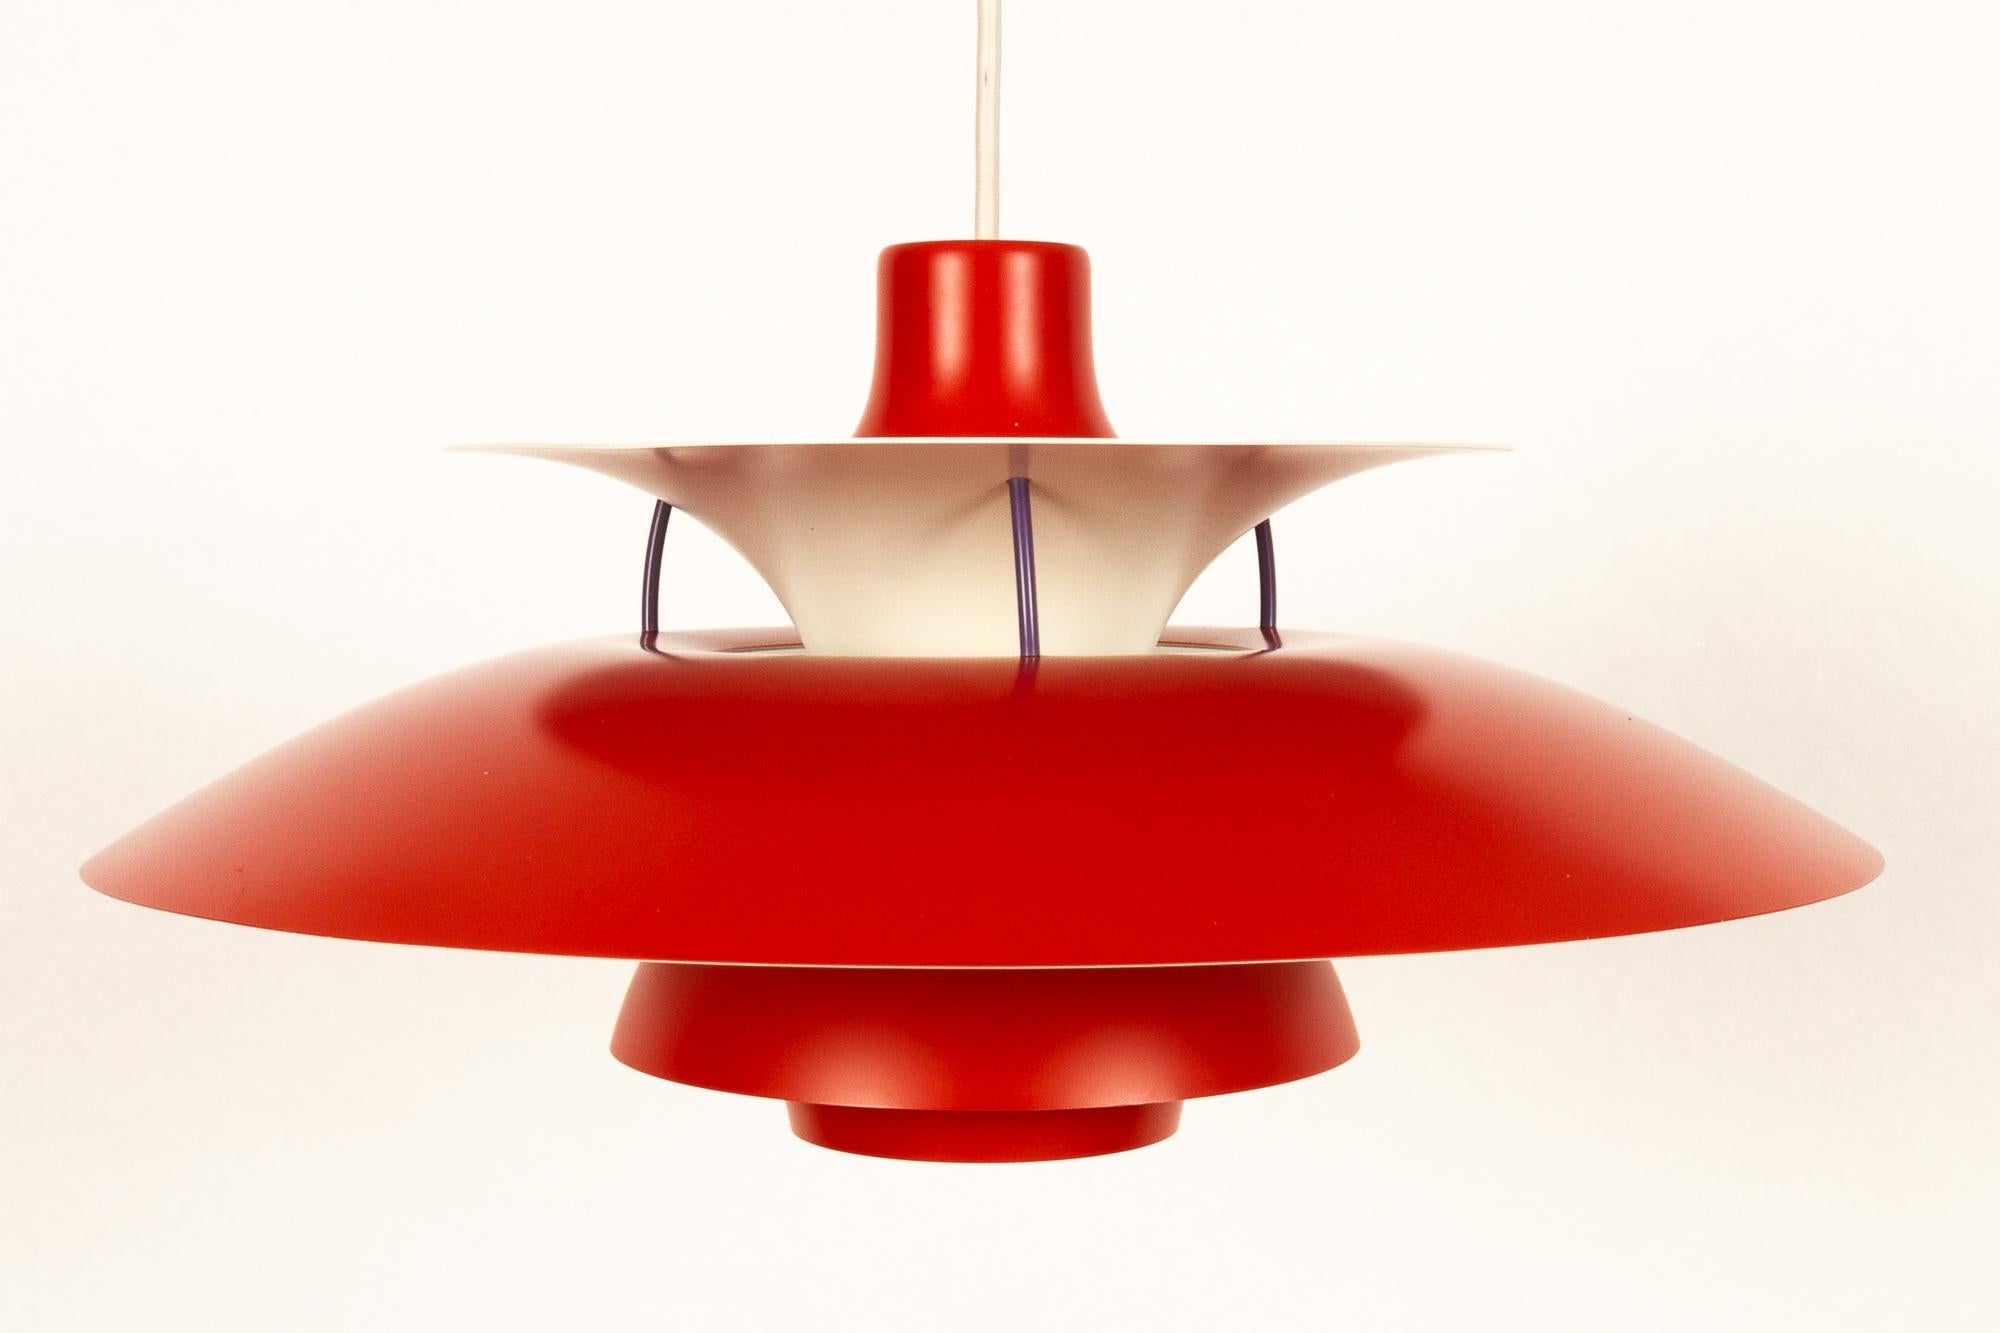 Danish vintage red ceiling pendant PH5 by Poul Henningsen 1970s.
Iconic Danish lighting designed in 1958 by Poul Henningsen for Louis Poulsen. This model is known as PH 5 because it has five individual shades. Upper sides in a beautiful warm red